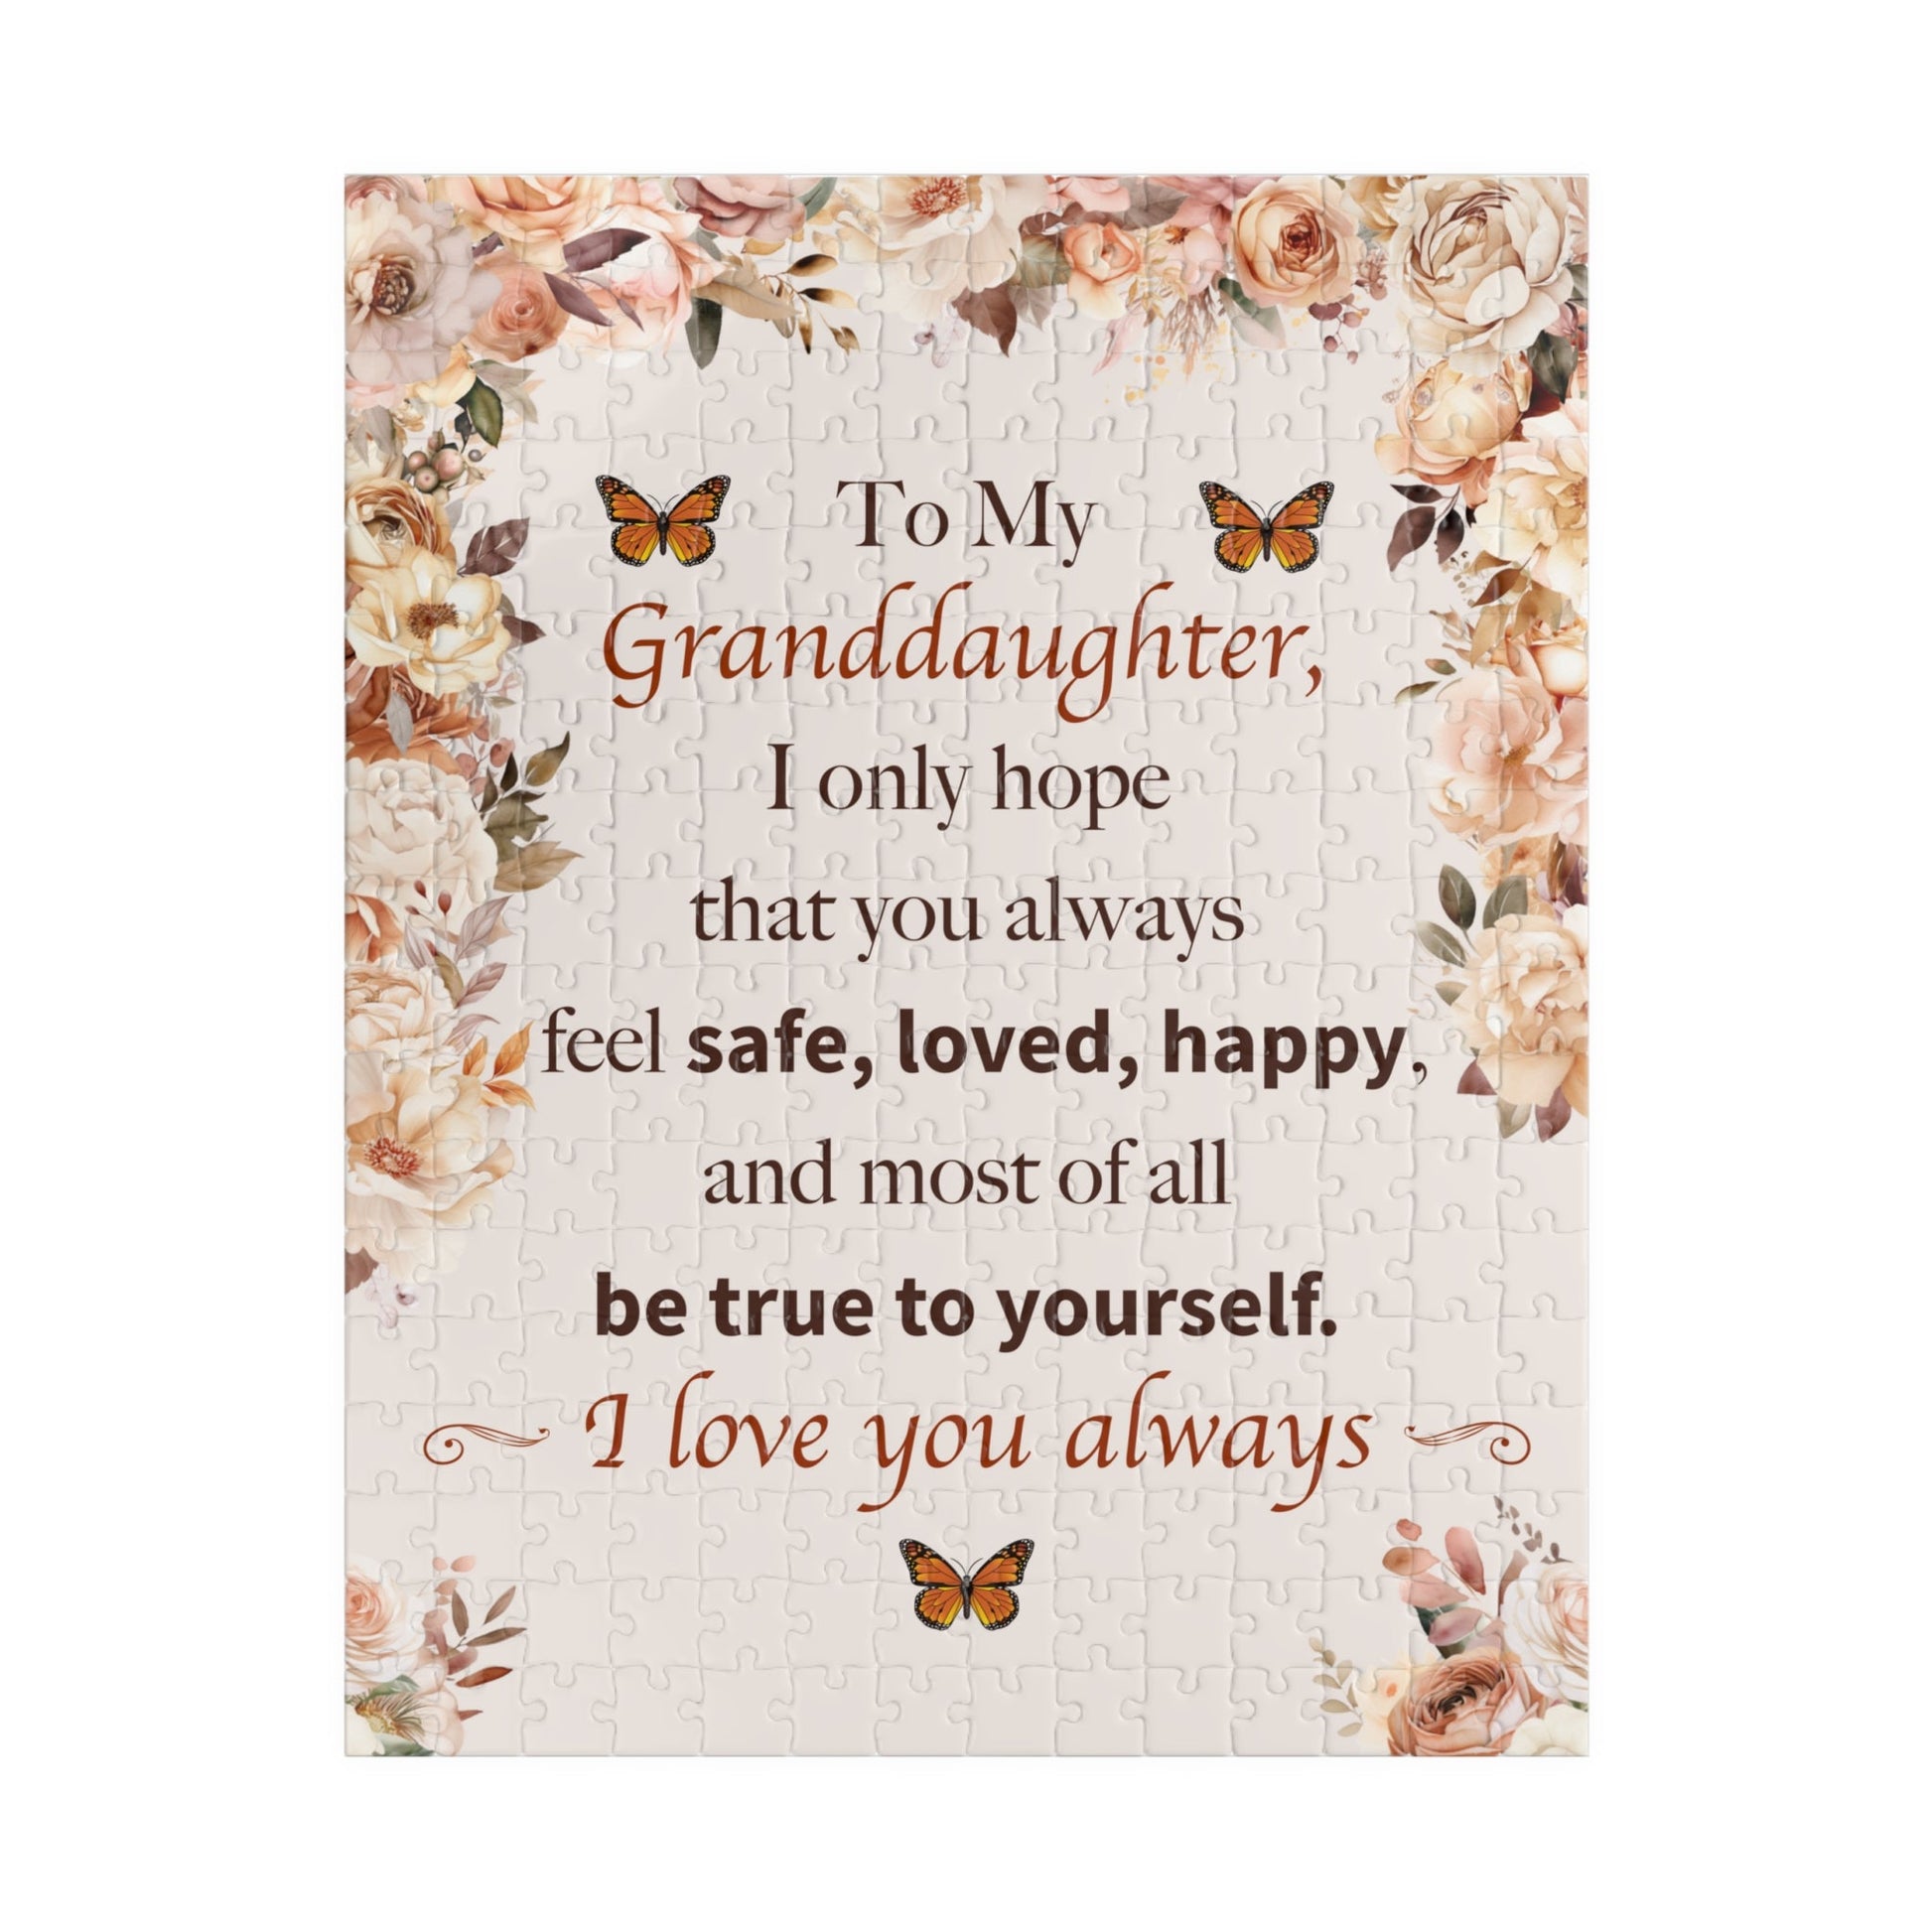 Granddaughter I Love You Puzzle - 252 pcs (Vertical)